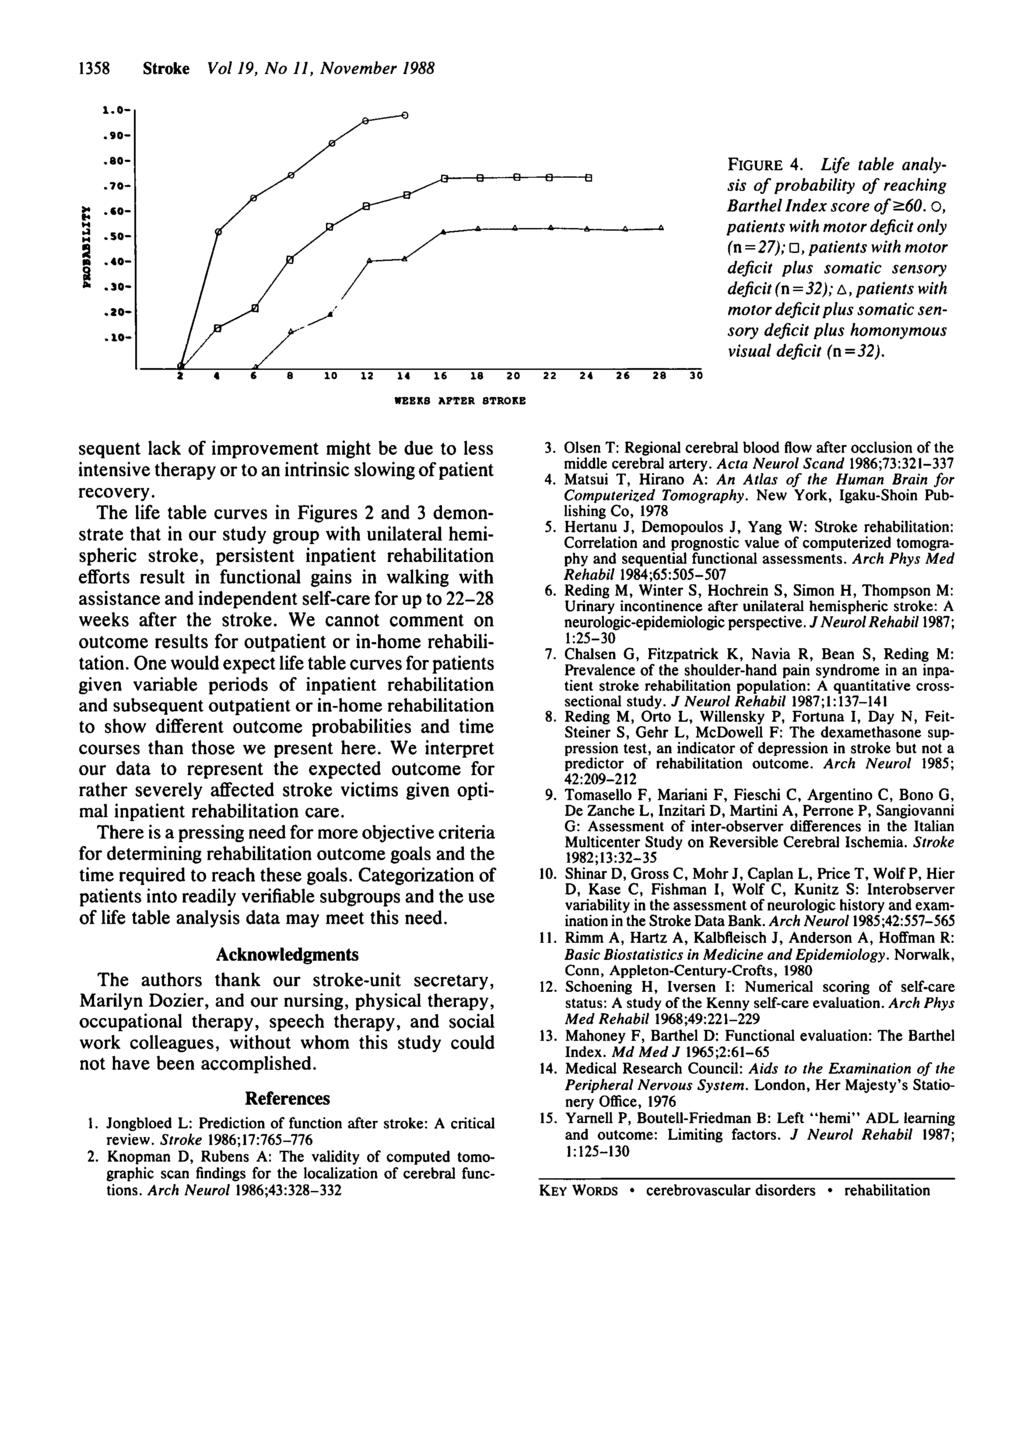 1358 Stroke Vol 19, No 11, November 1988 FIGURE 4. Life table analysis of probability of reaching Barthel Index score of ^60.